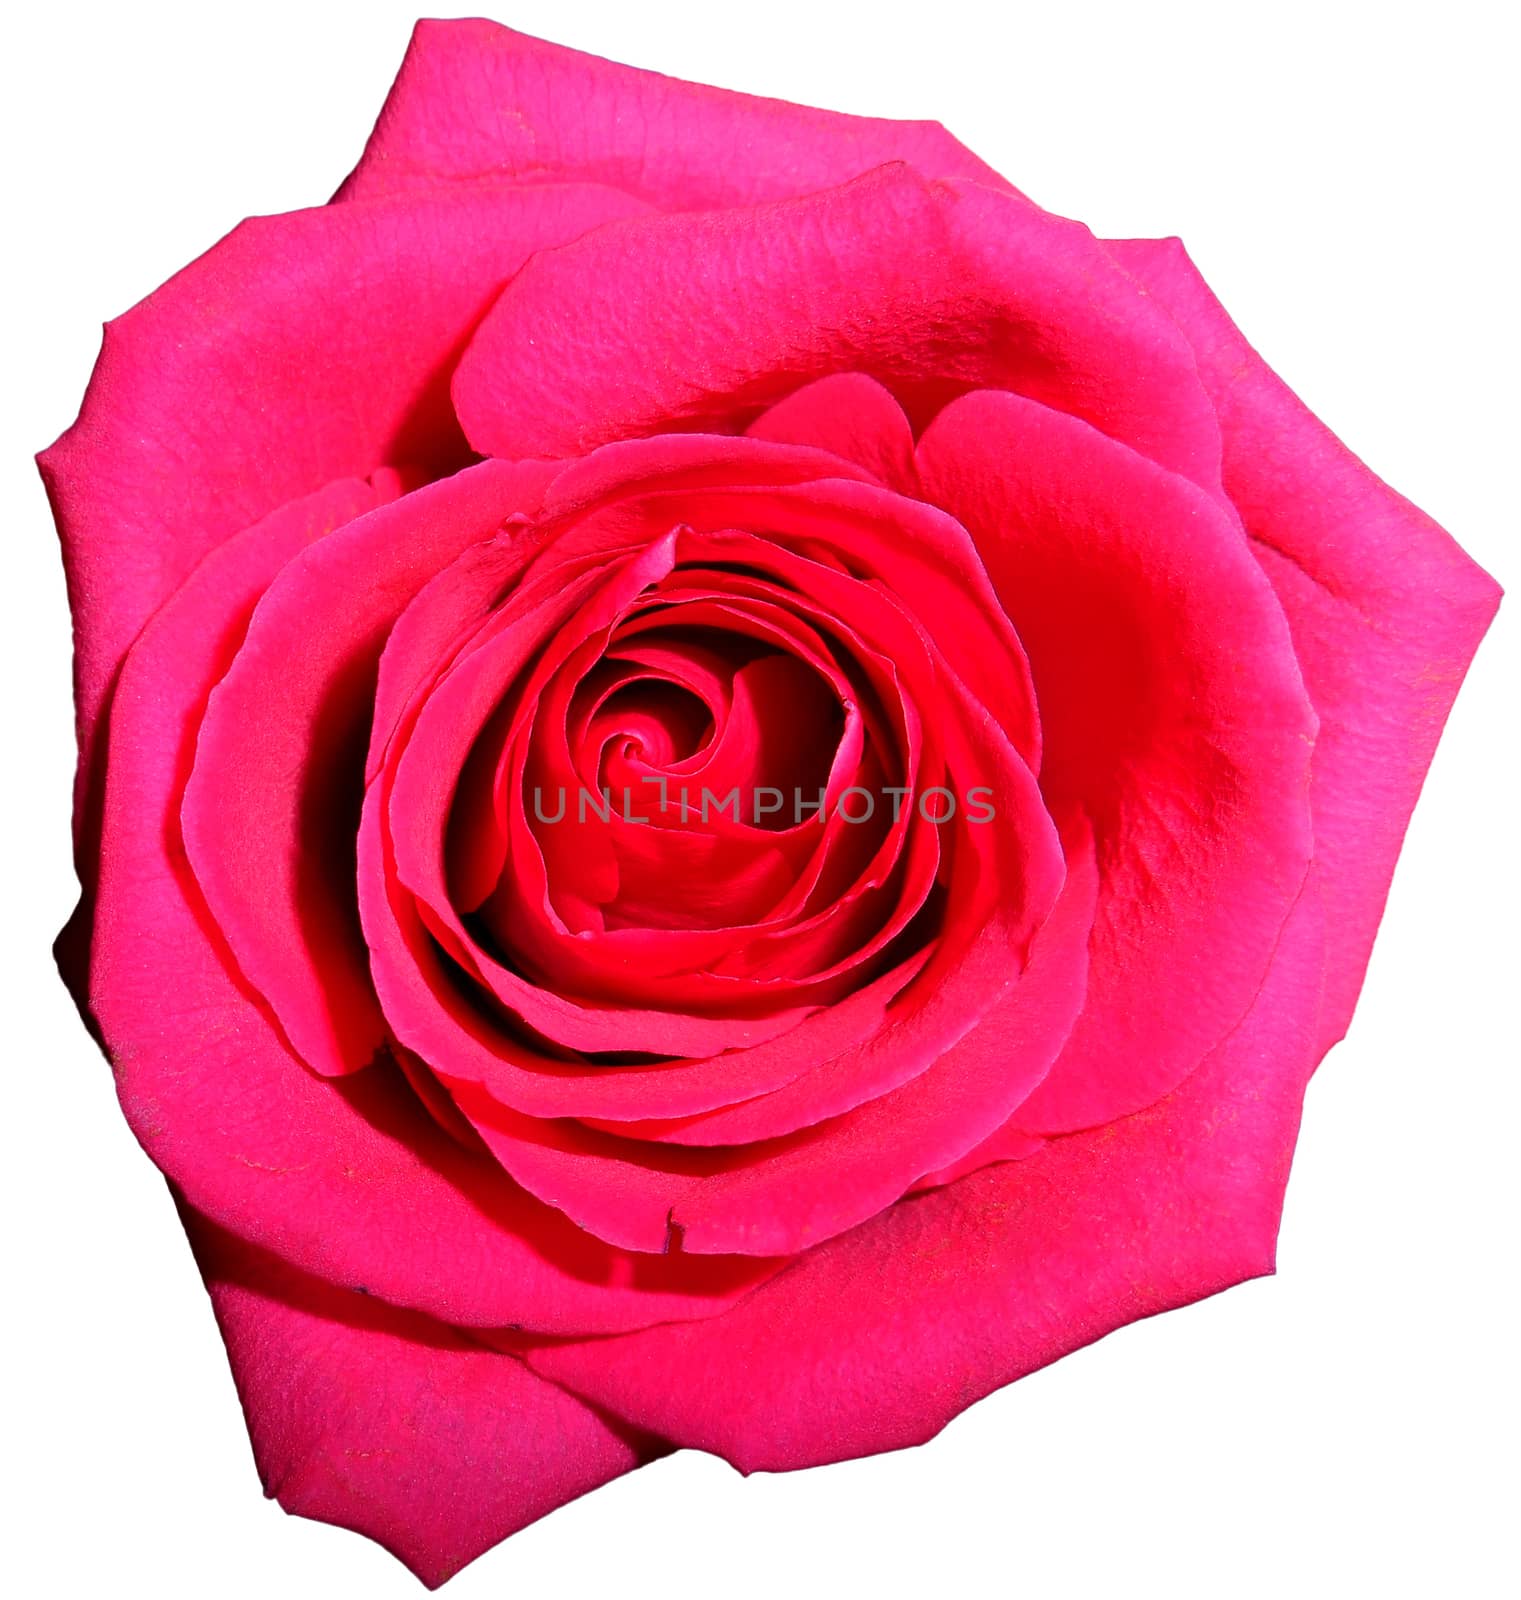 Isolated close up view of a pink rose.

Picture taken on November 25, 2014.